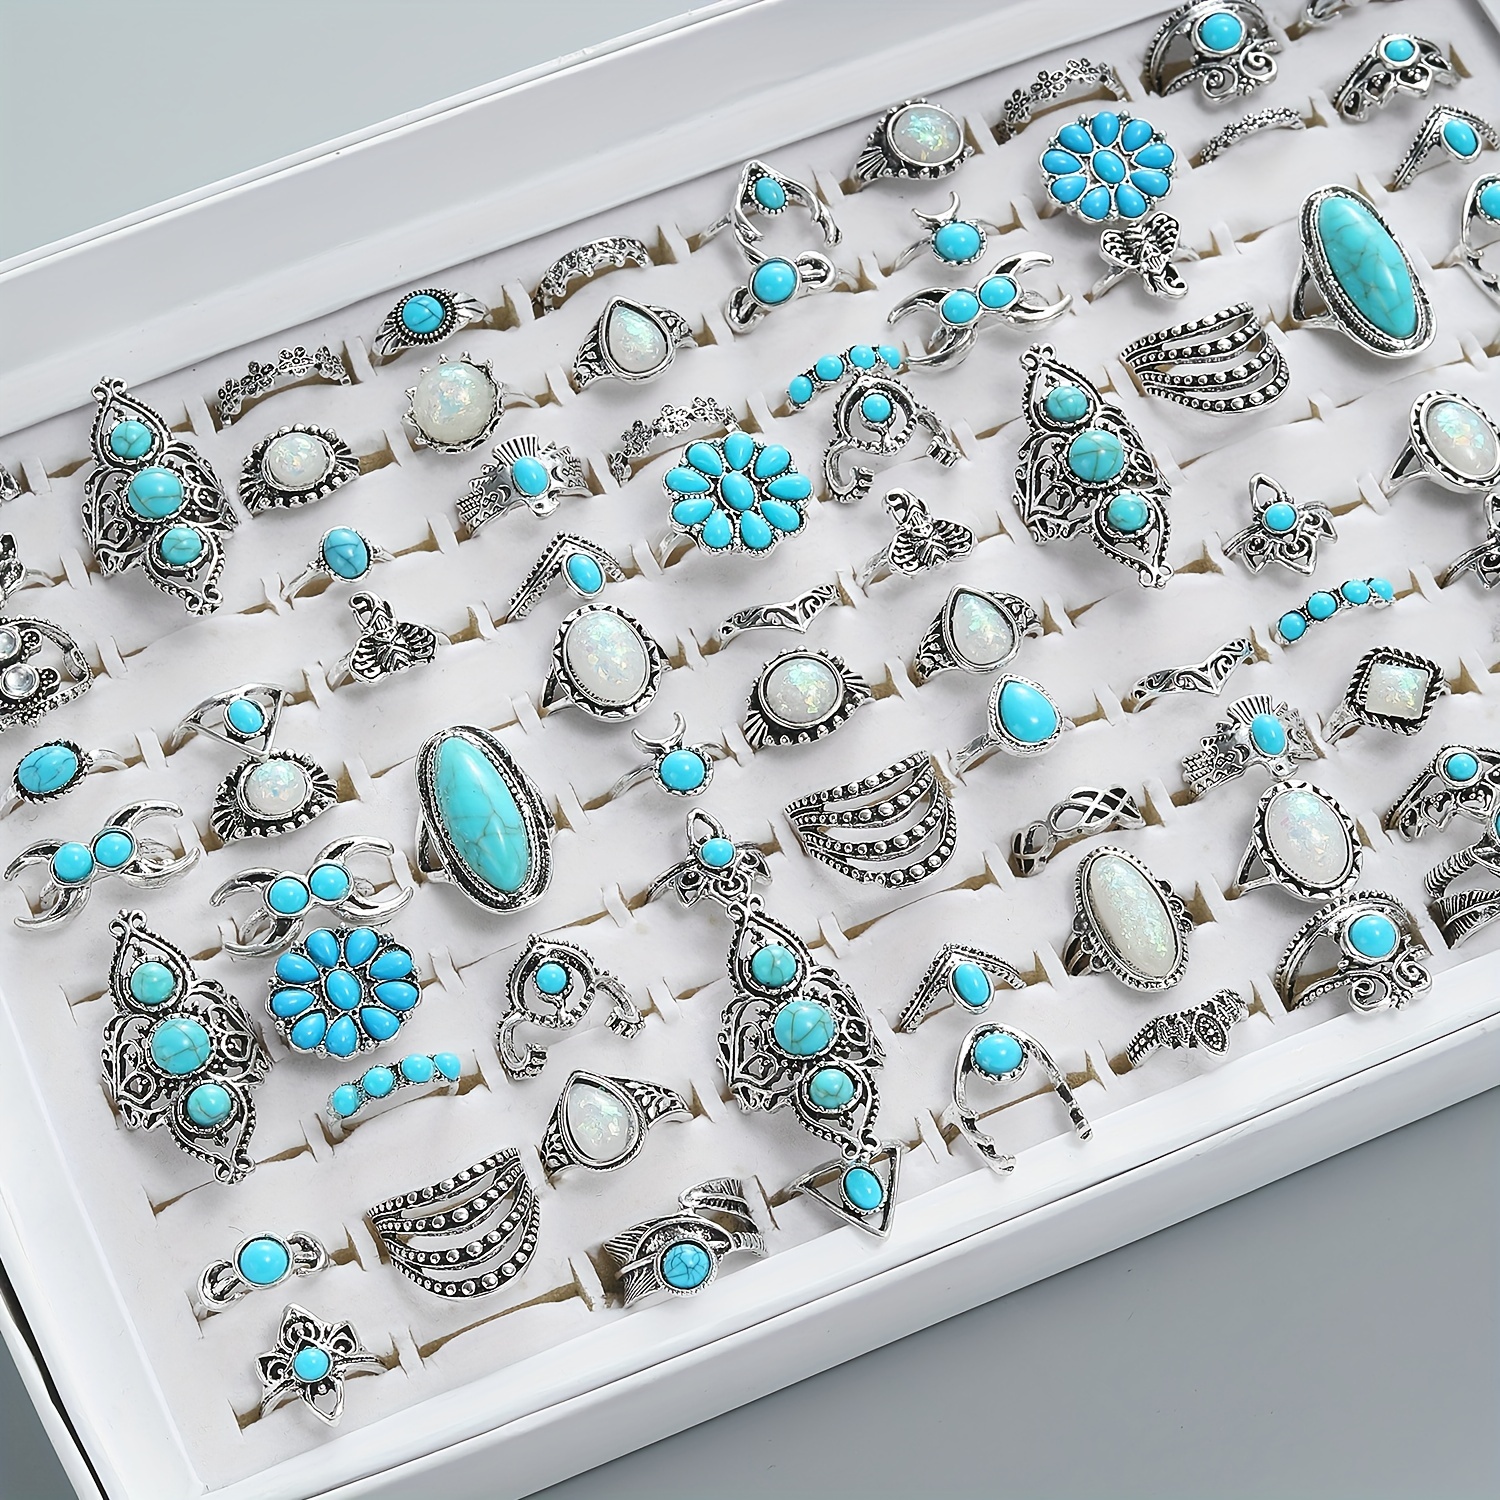 

40pcs Boho Style Ring Set Inlaid Turquoise Trendy Flower/ Elk/ Eagle Design Mix And Match For Daily Outfits Blind Bag With Uncertain Styles